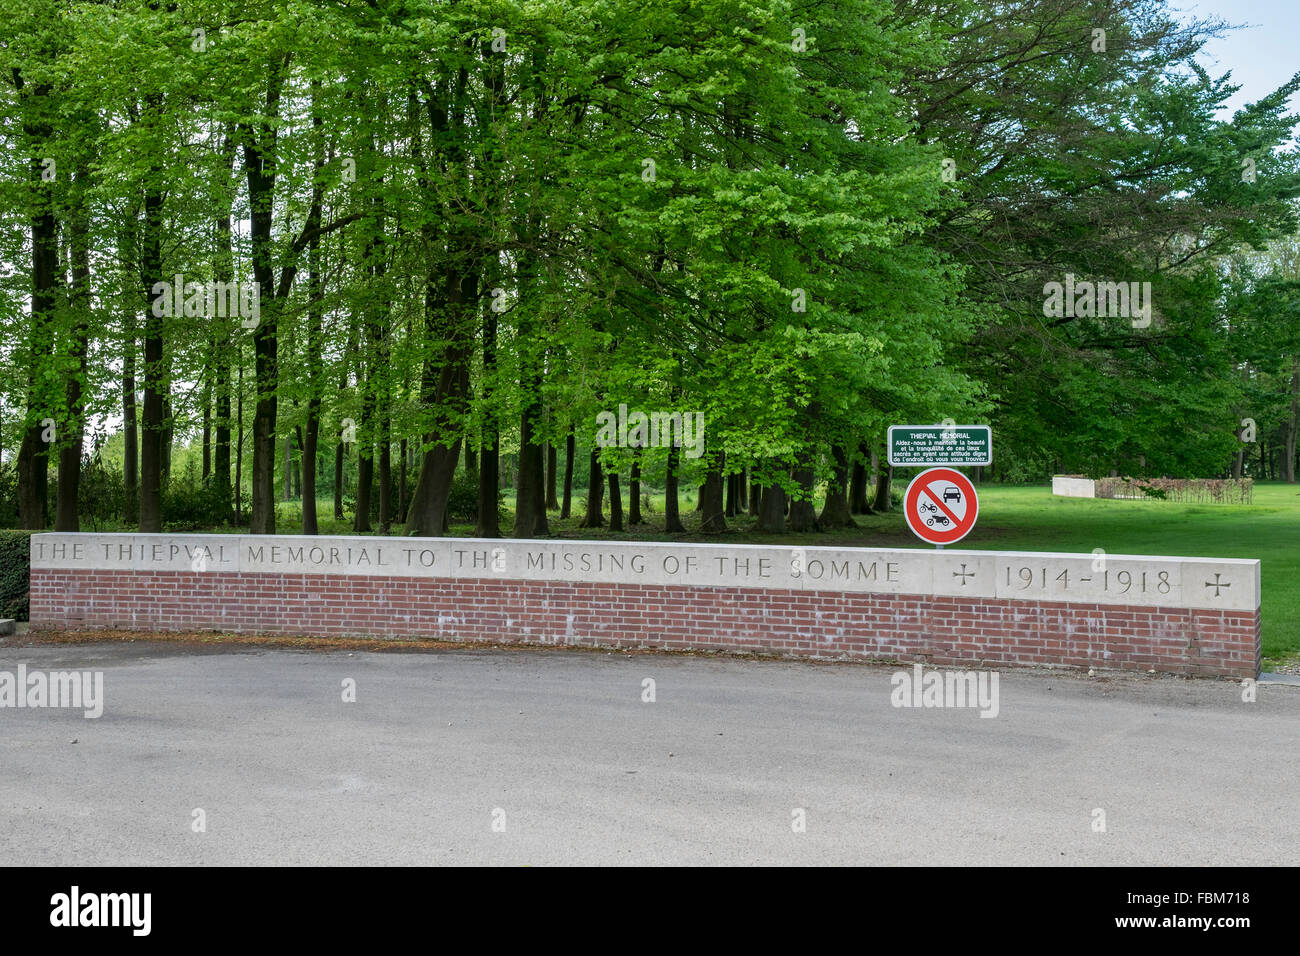 Wall at the entrance of 'The Thiepval Memorial to the Missing of the Somme - 1914-1918' Stock Photo